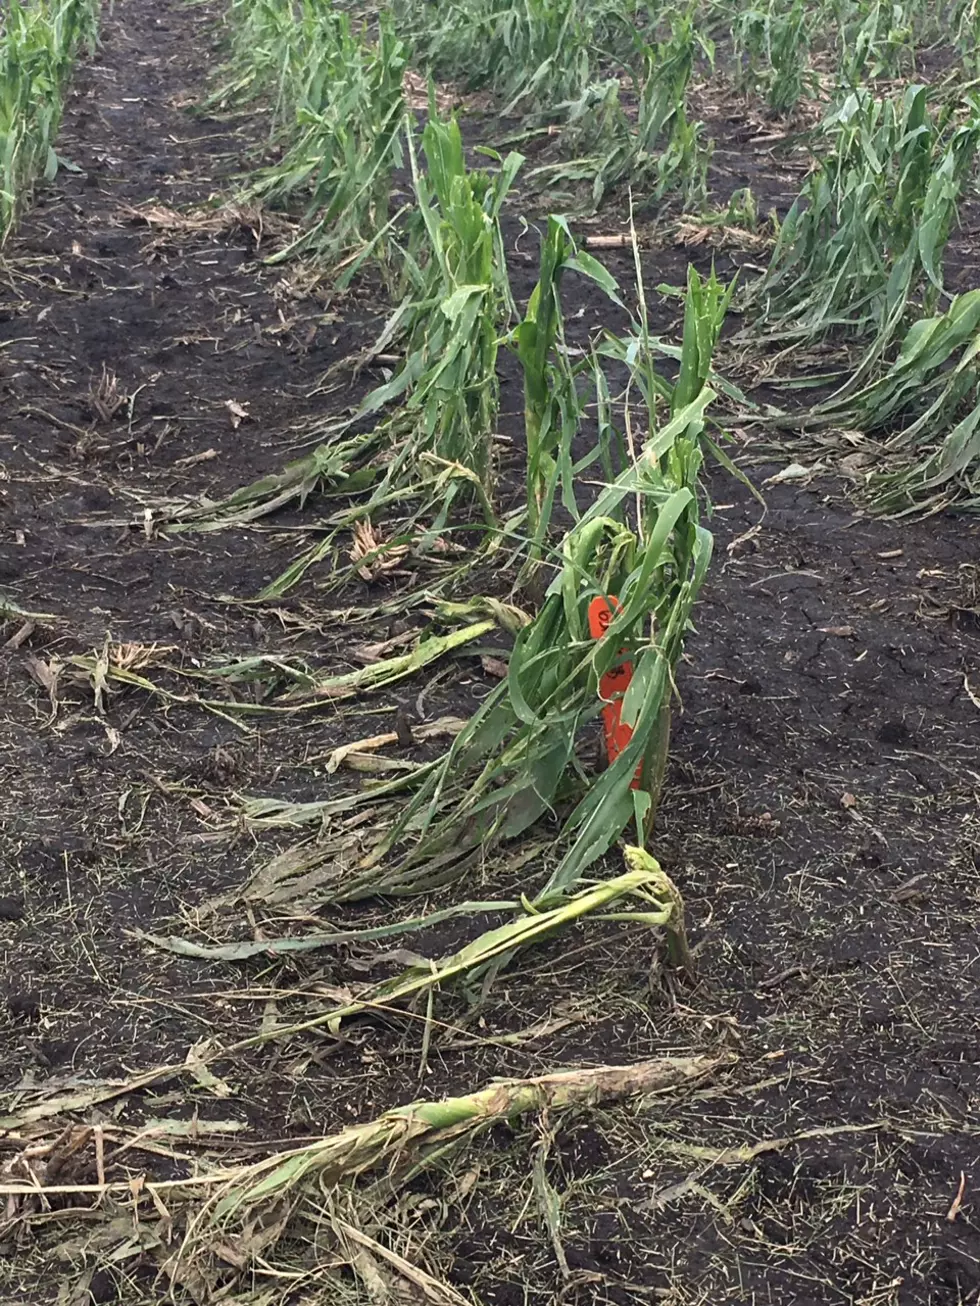 Hail Damage Can Wipe Out A Crop